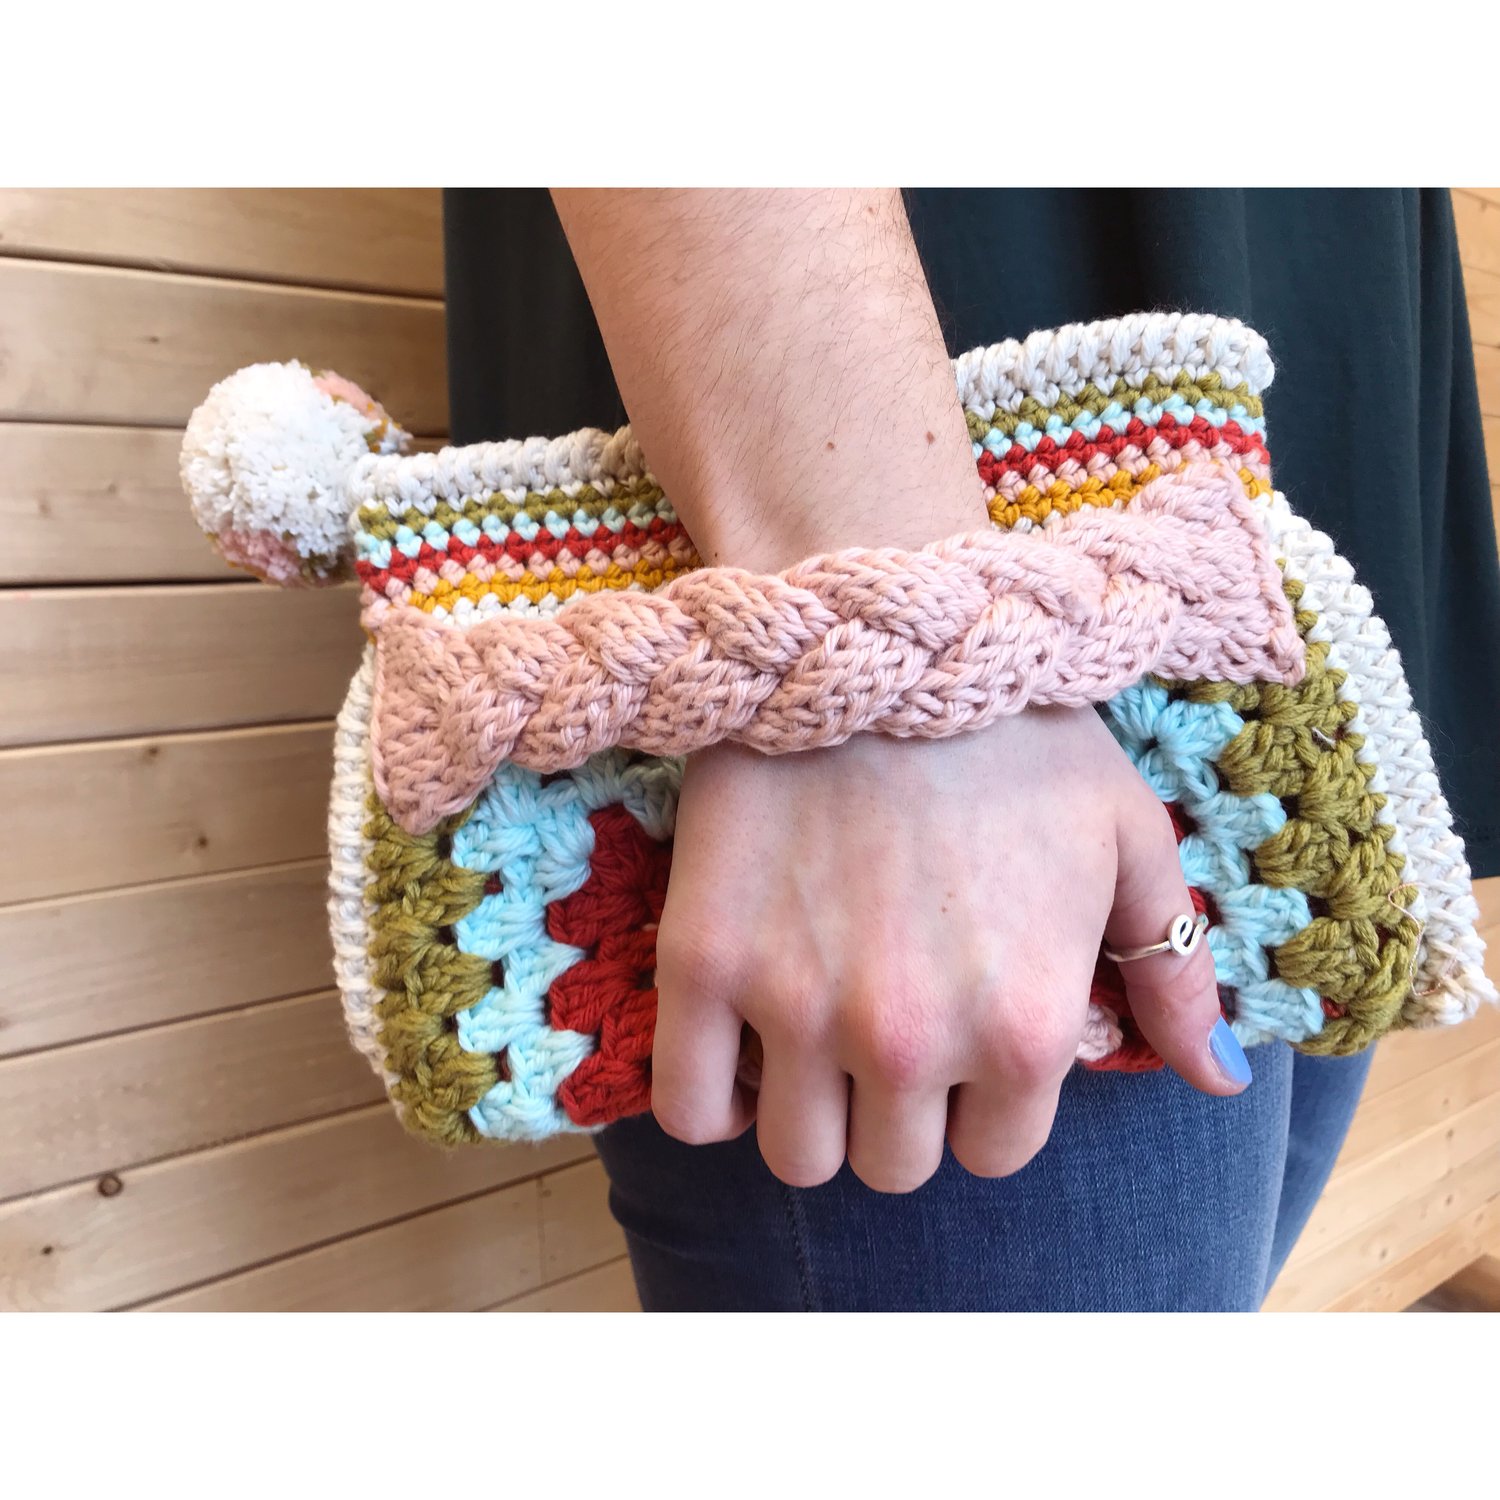 Image of Braided Clutch Hand Strap